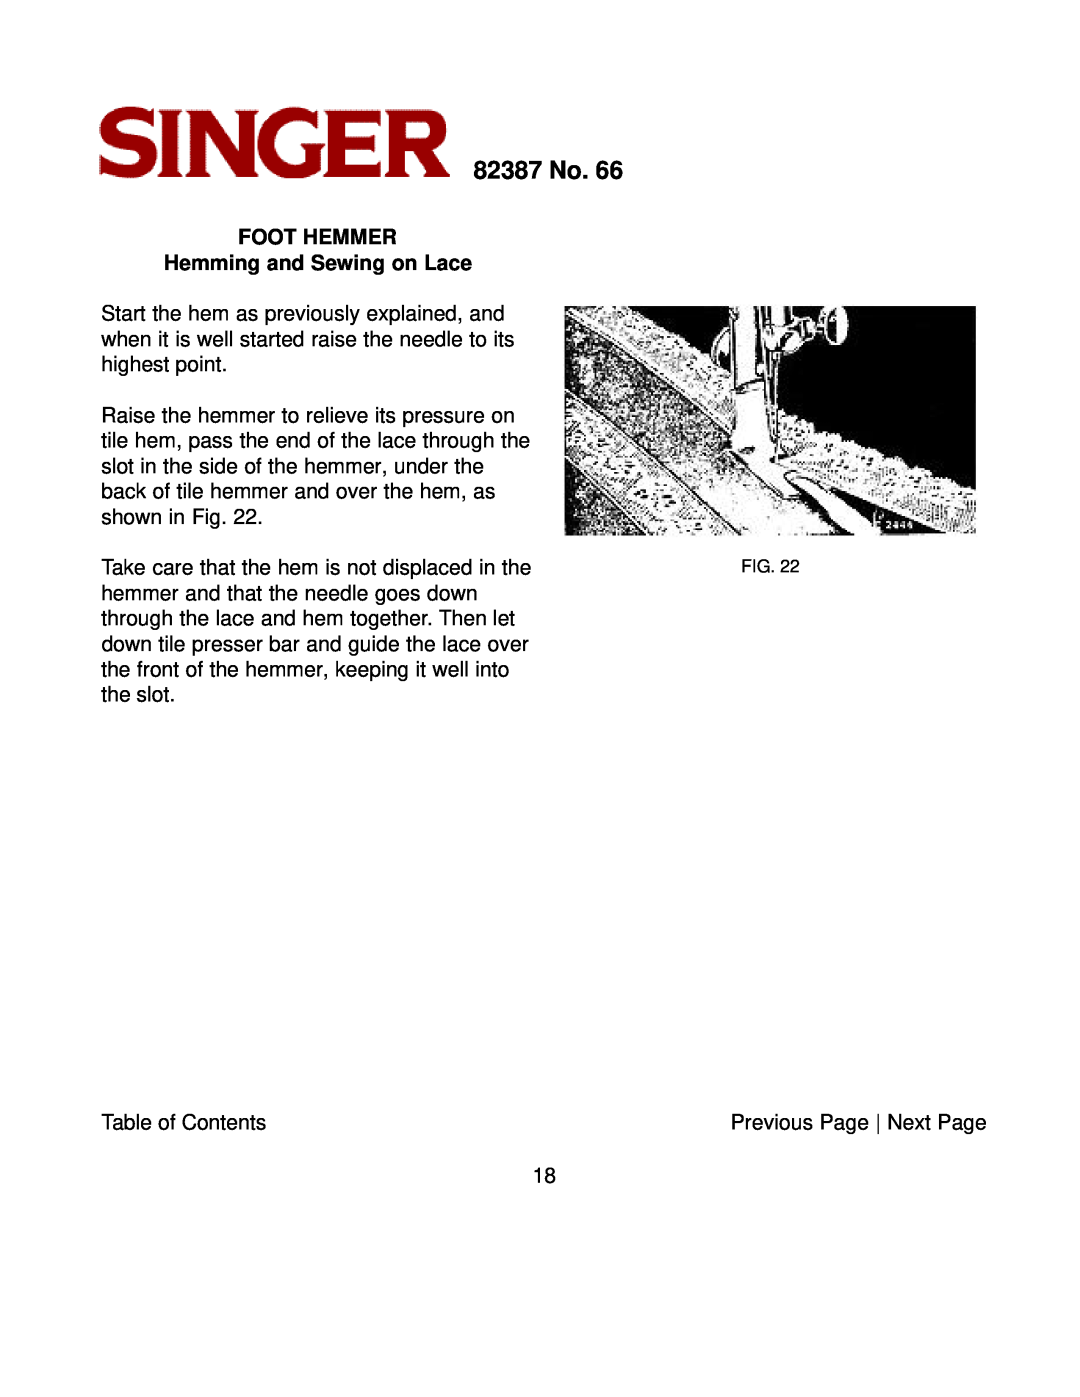 Singer instruction manual FOOT HEMMER Hemming and Sewing on Lace, 82387 No 